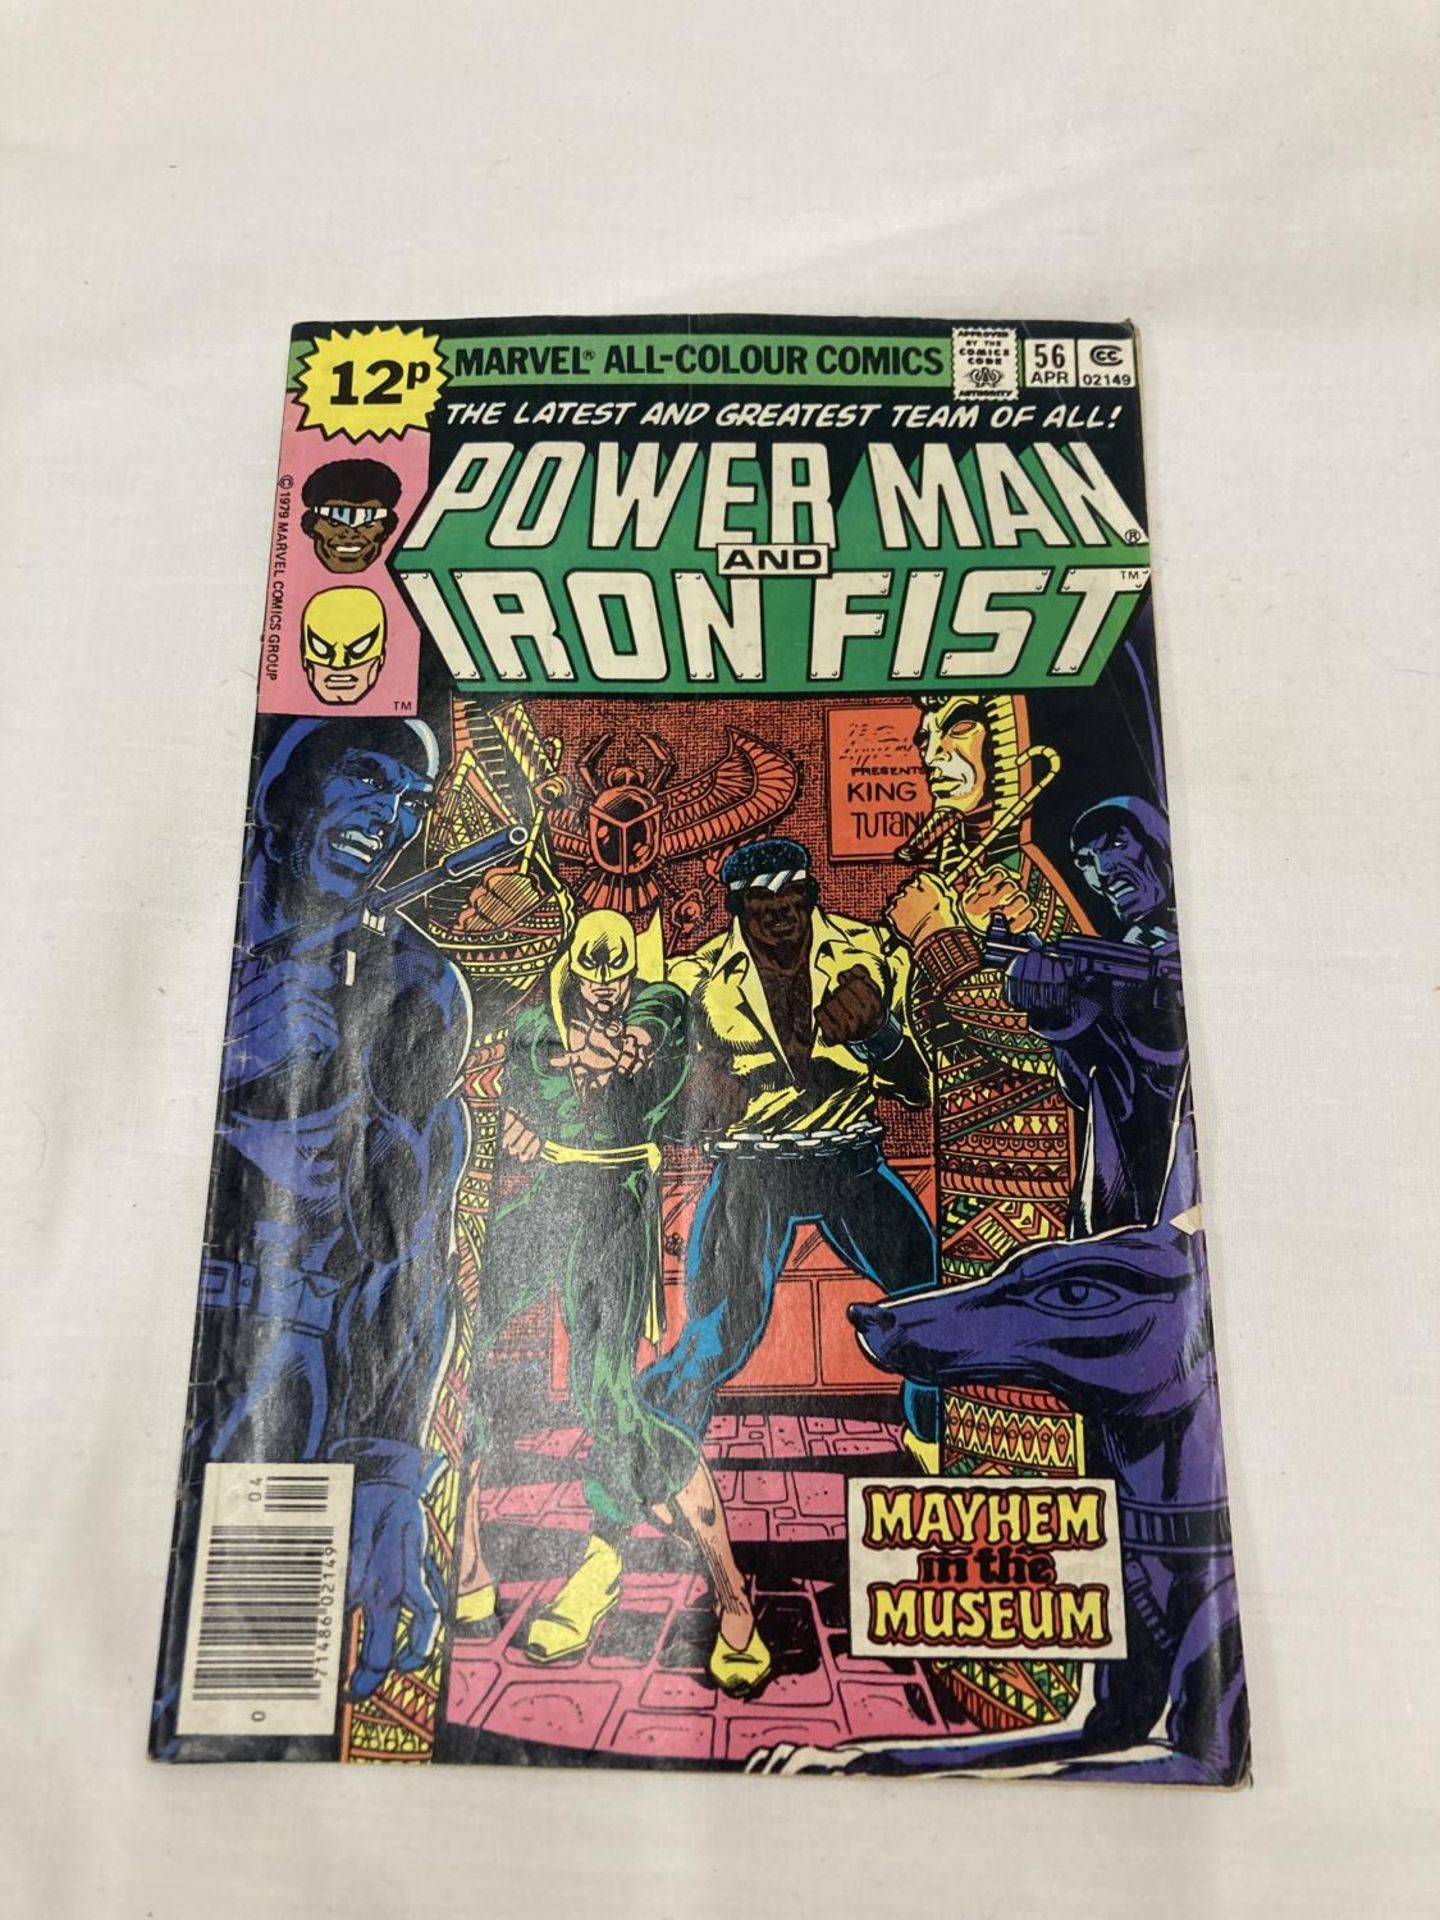 FIVE VINTAGE MARVEL POWERMAN AND IRON FISH COMICS FROM THE 1970'S - Image 11 of 14